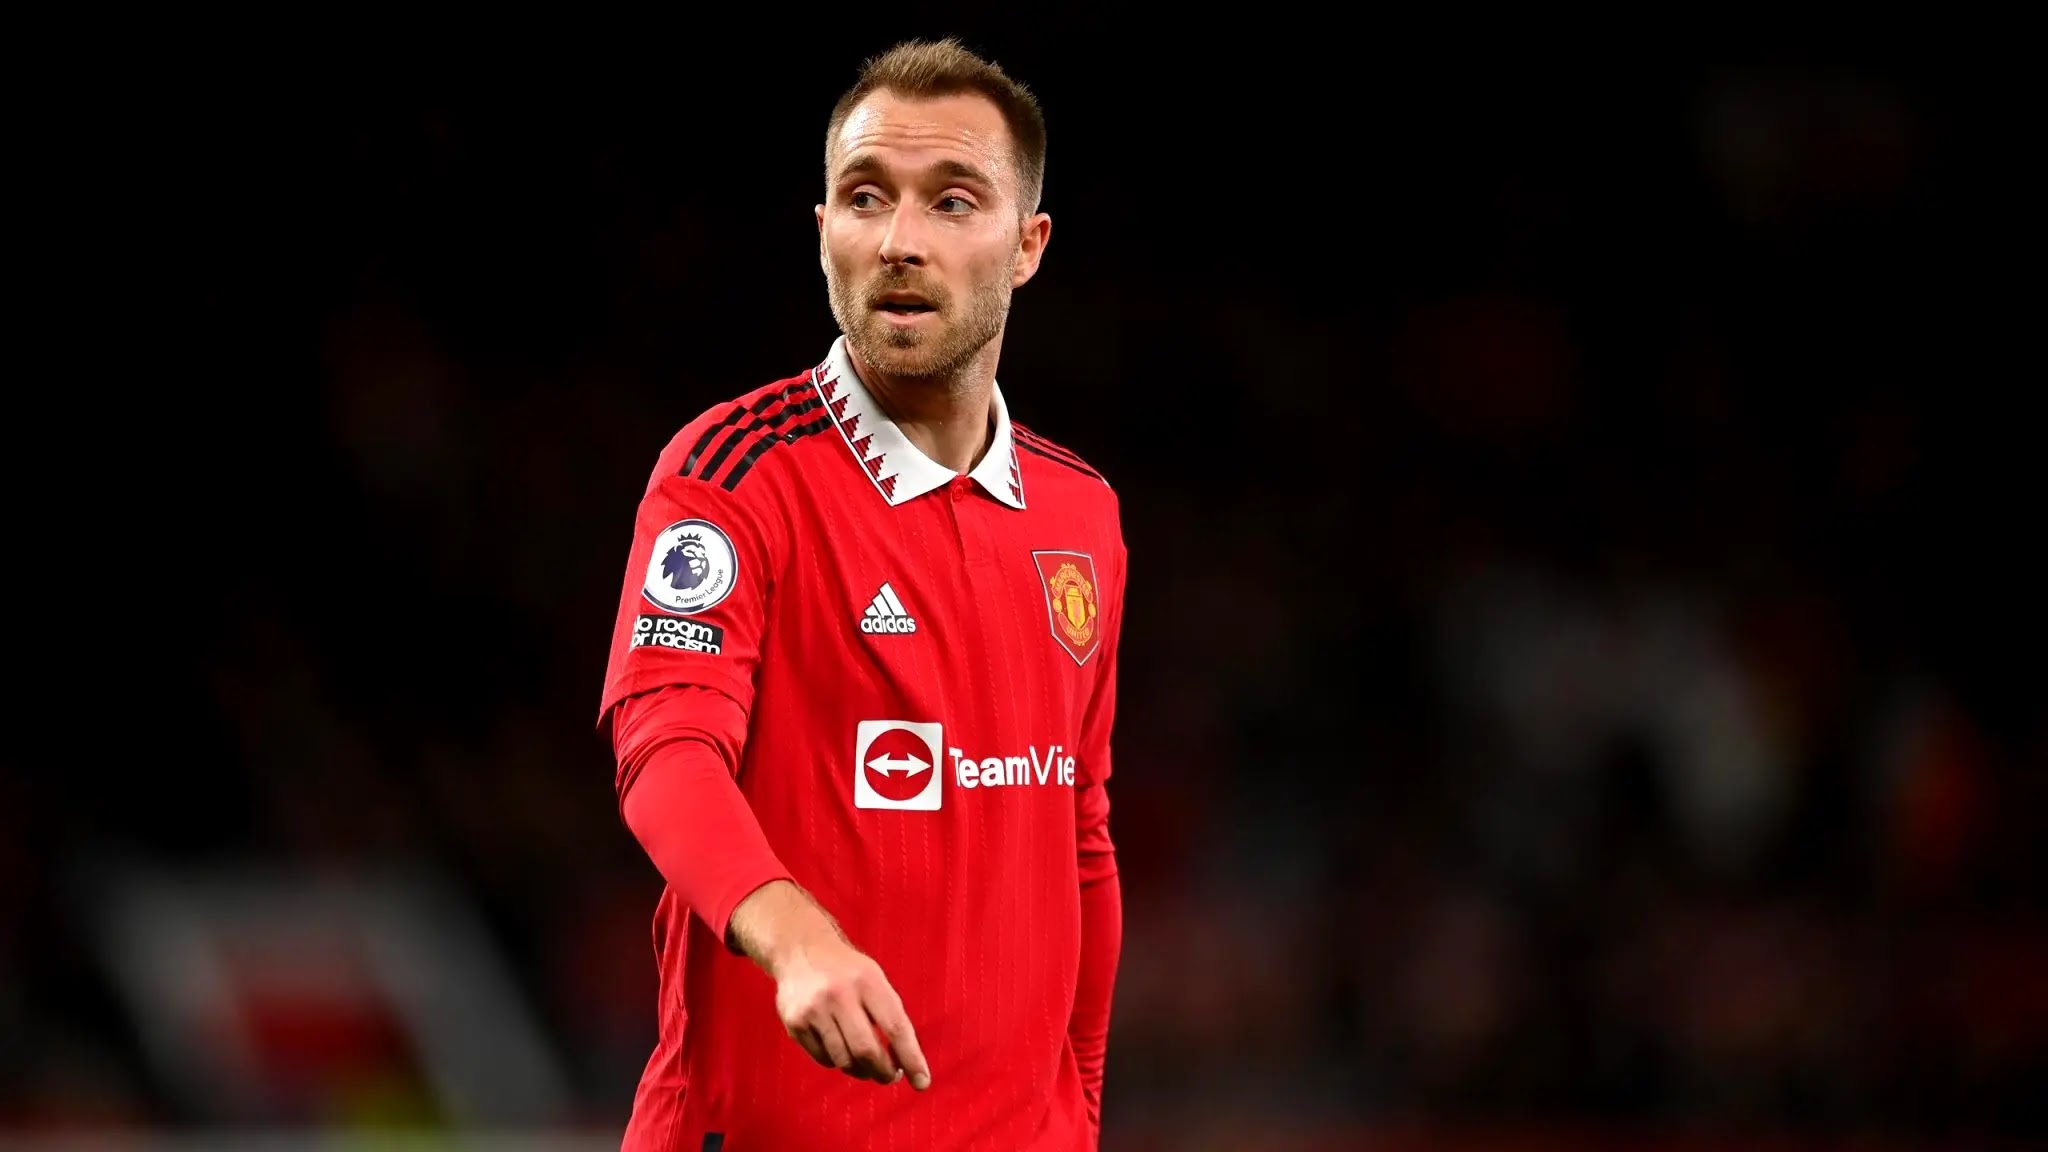 Man Utd confirm Eriksen will be out till late April